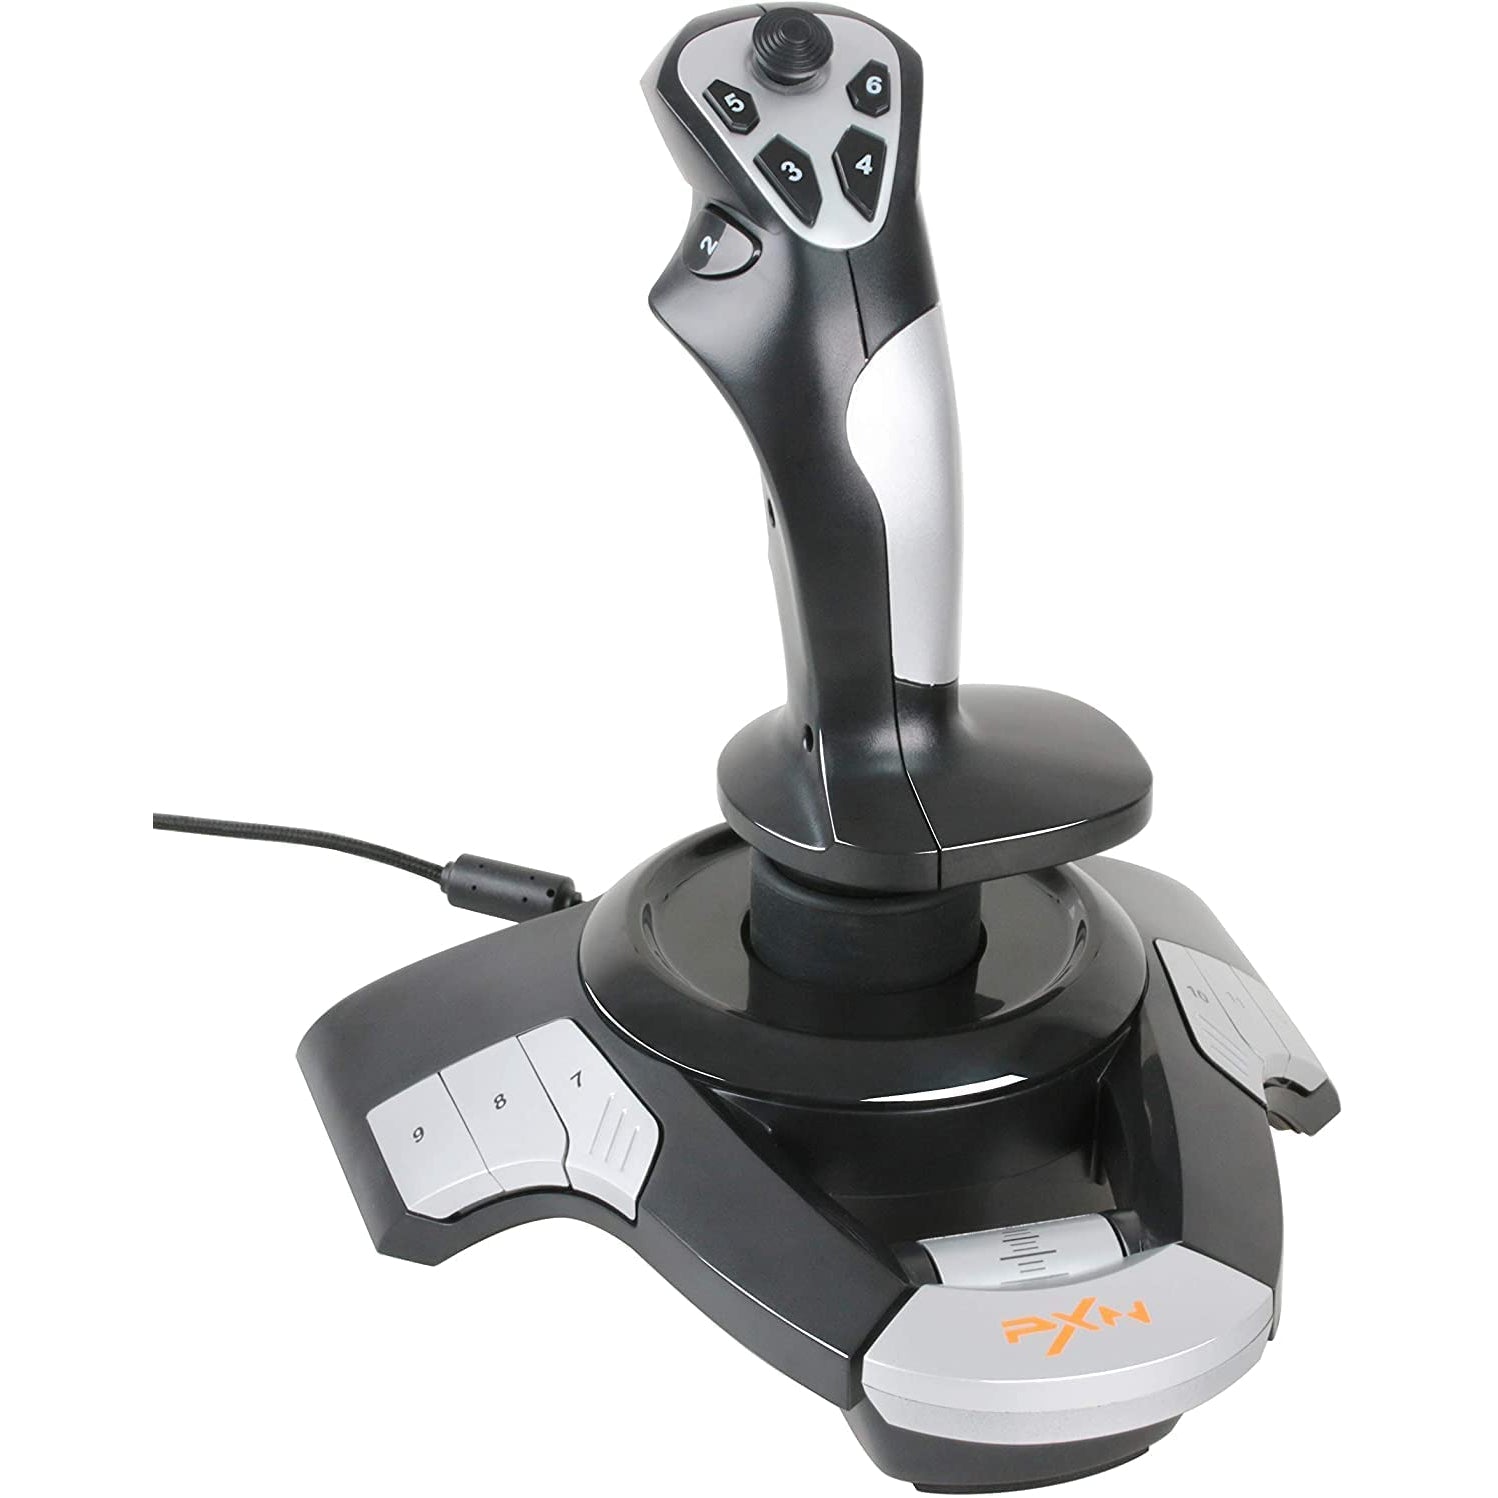 PXN F16 Wired Flight Stick Joystick with Vibration Function